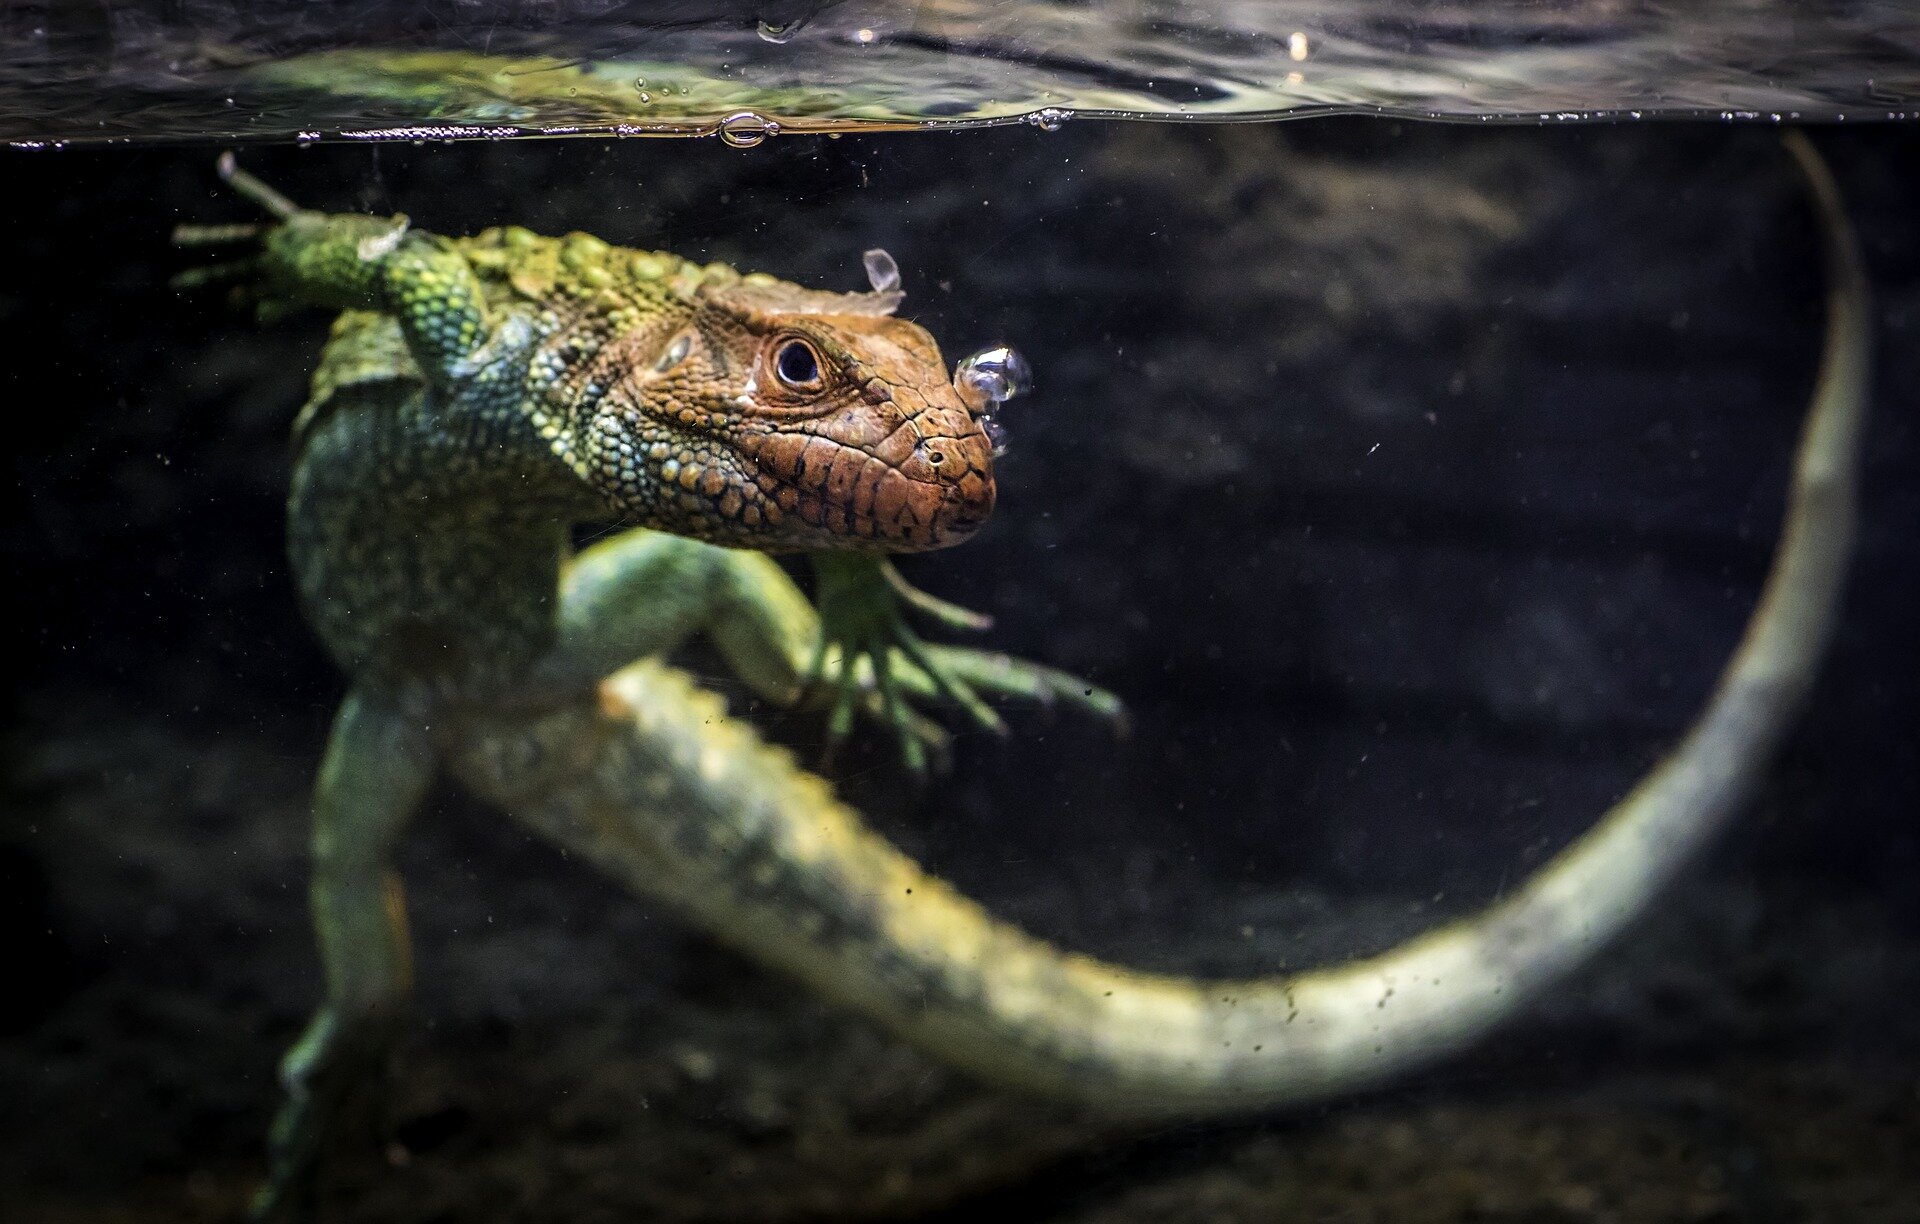 Later, gator? One-fifth of all reptile species could go extinct, new study says